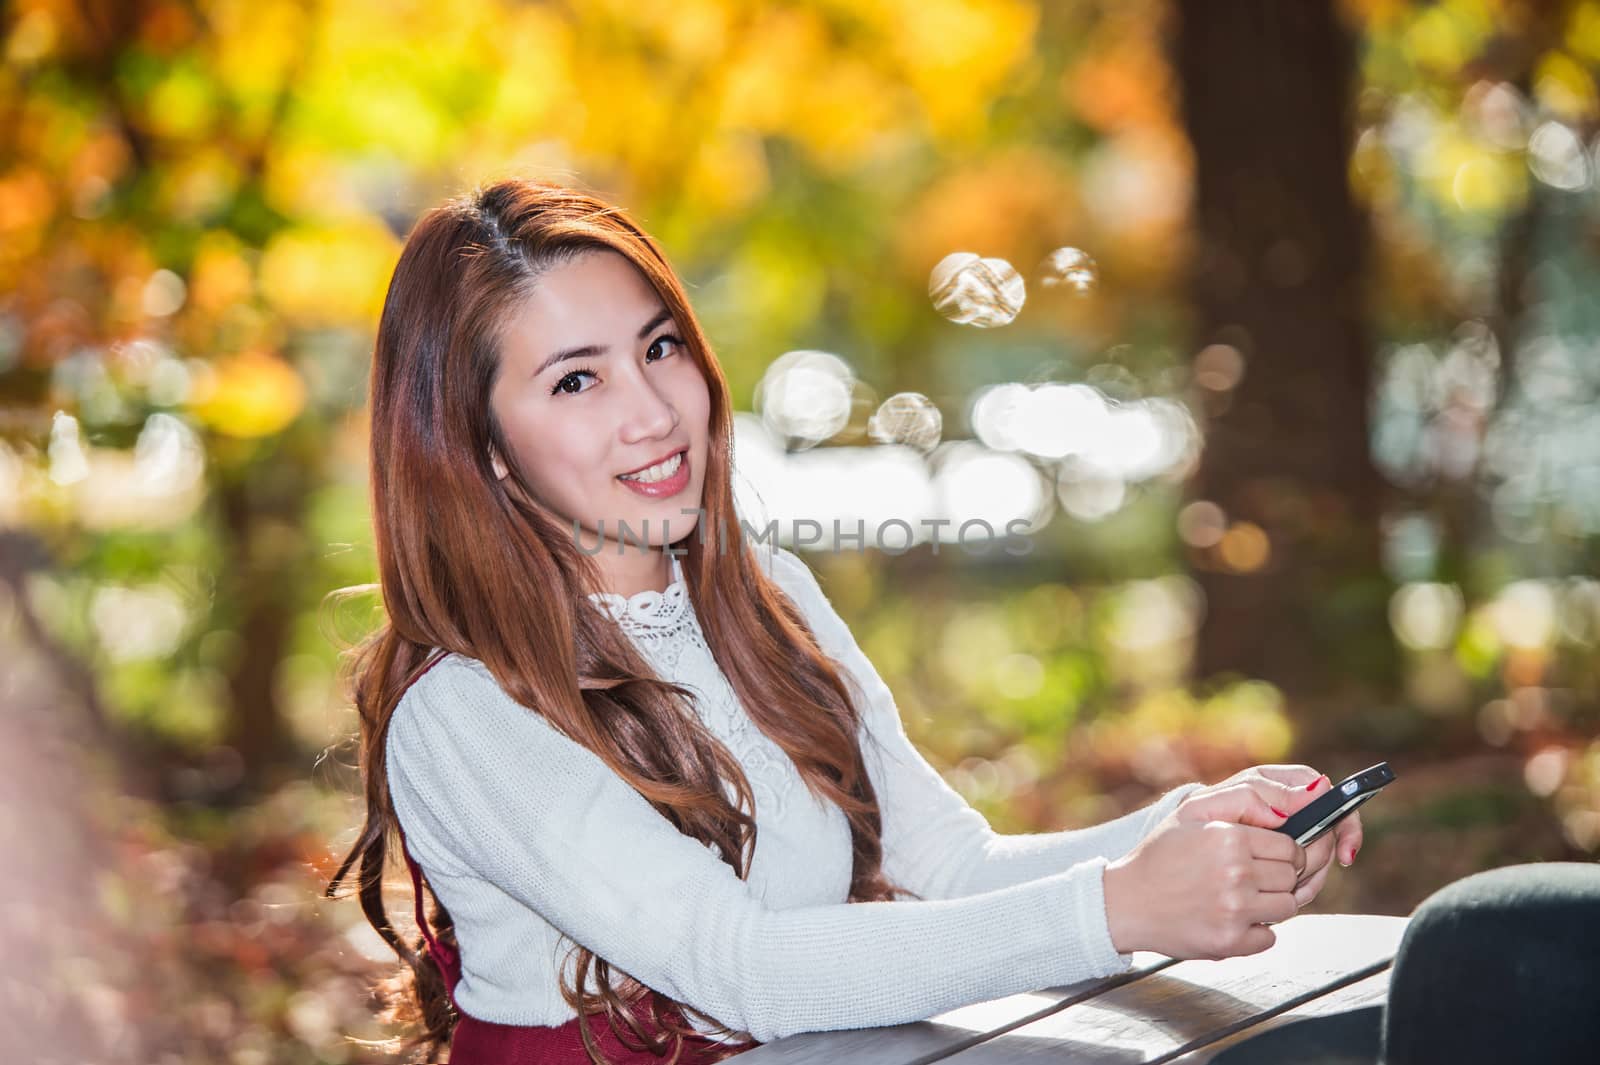 Beautiful woman smiling and hand holding smartphone in fall forest park.